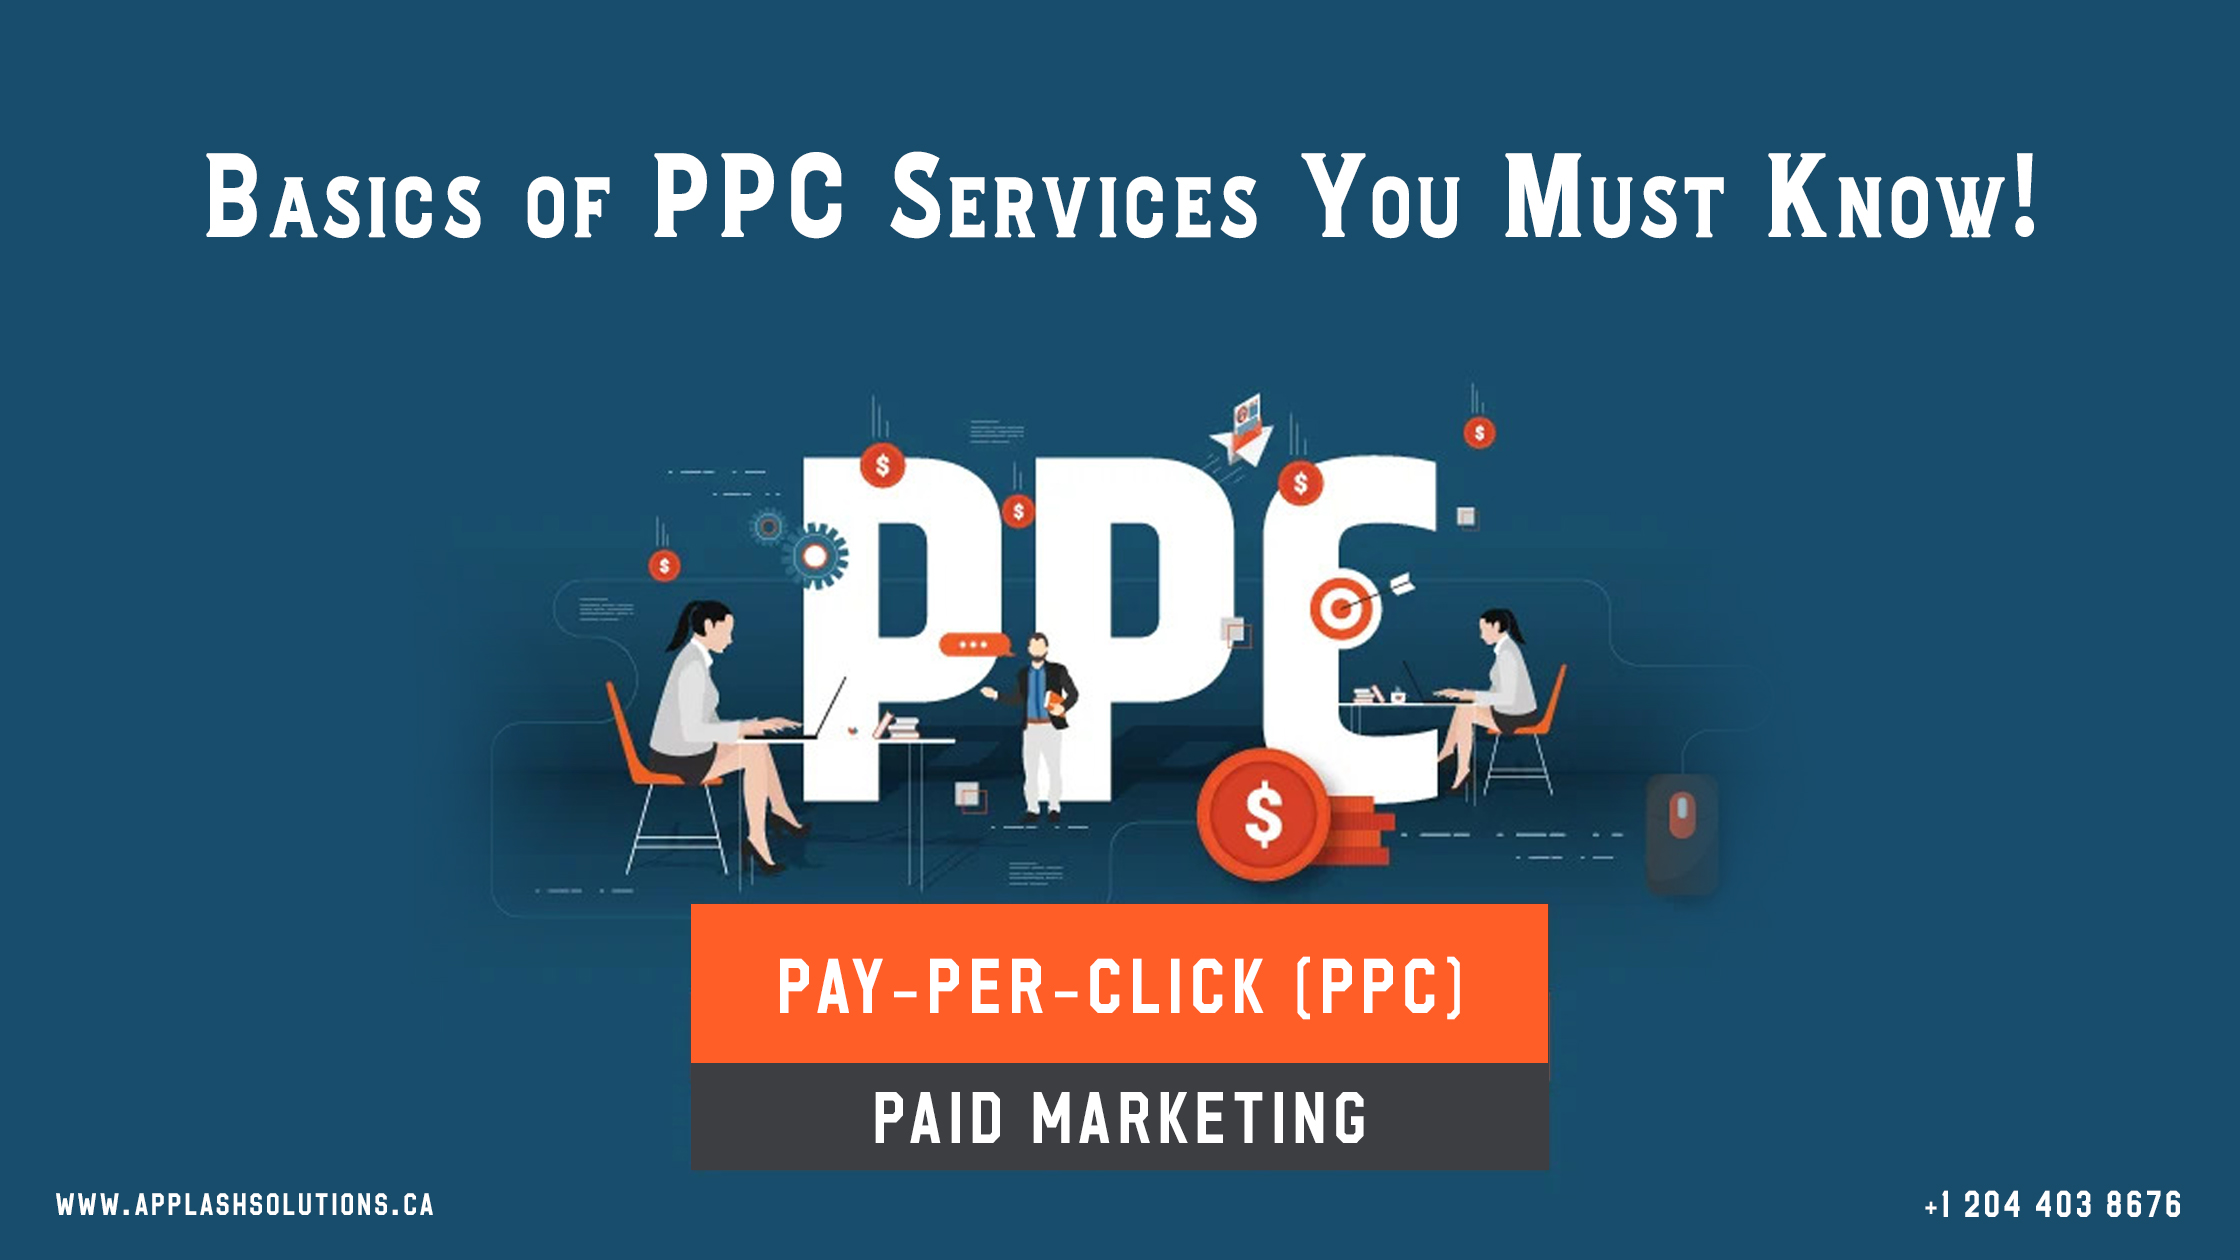 Basics of PPC Services You Must Know!